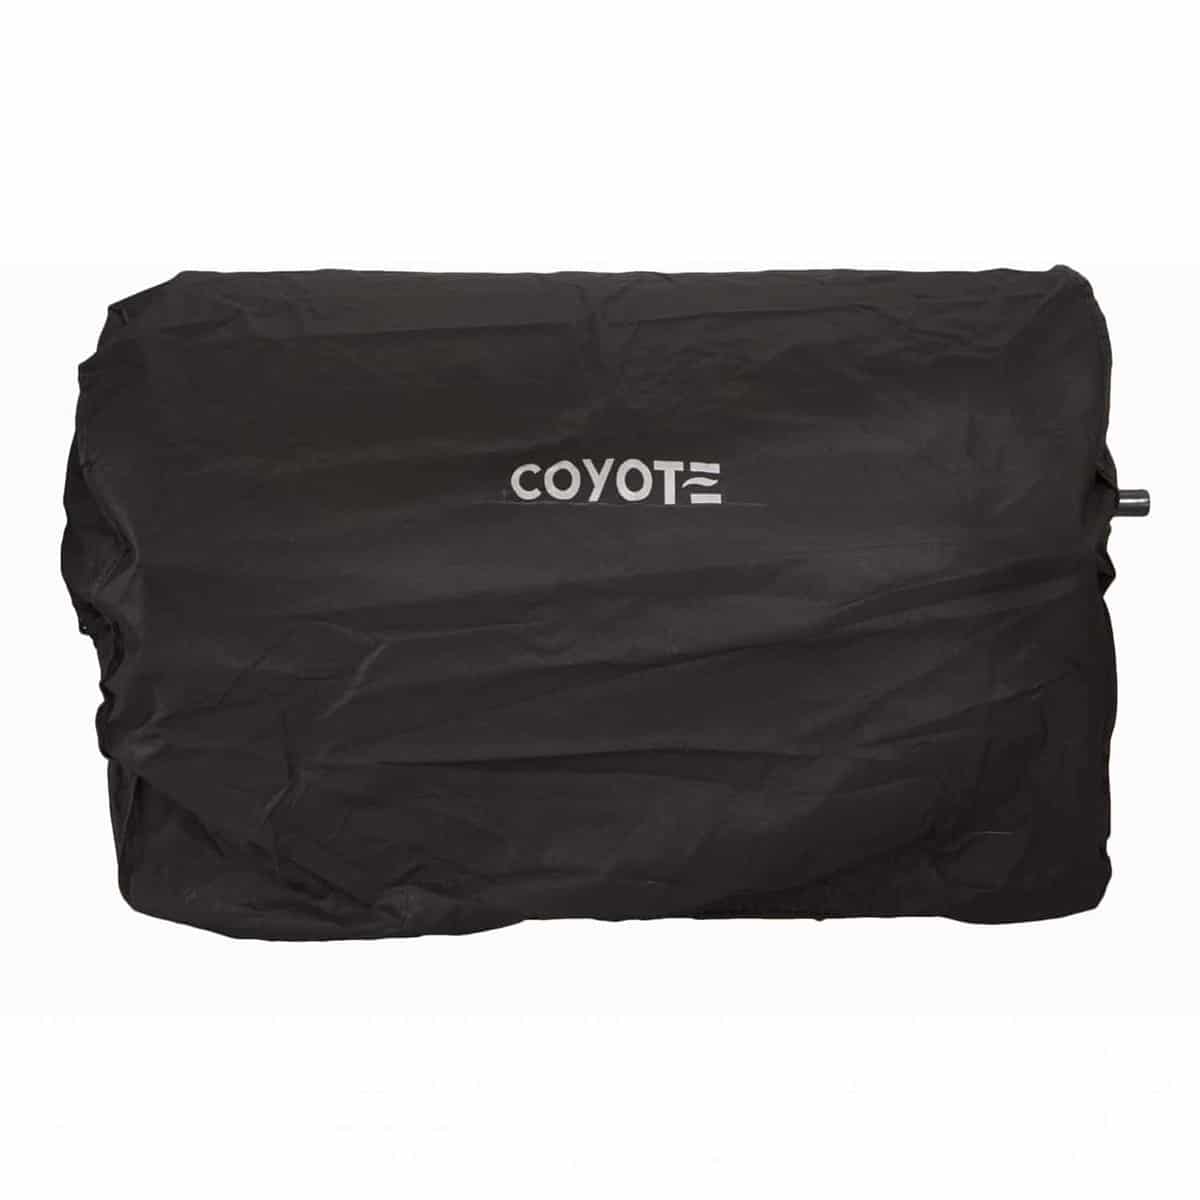 Coyote black vinyl cover for Coyote portable grill. 